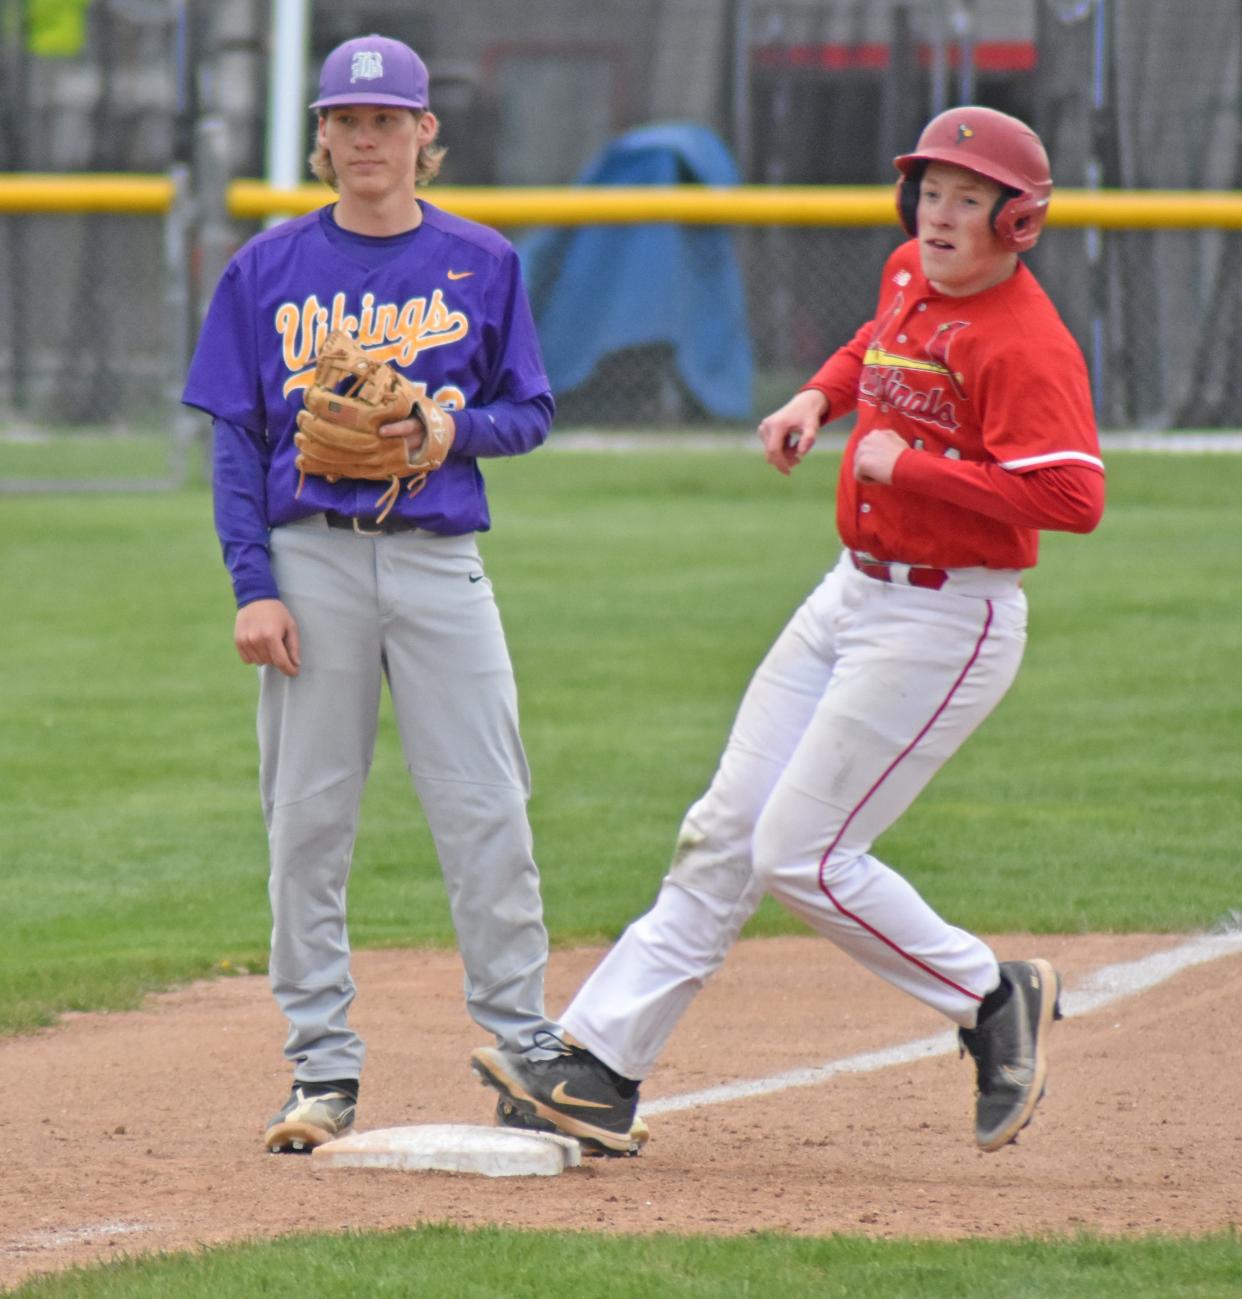 Coldwater's Logan Smiertka rounds third on a passed ball while Bronson third baseman James Jourdan looks on